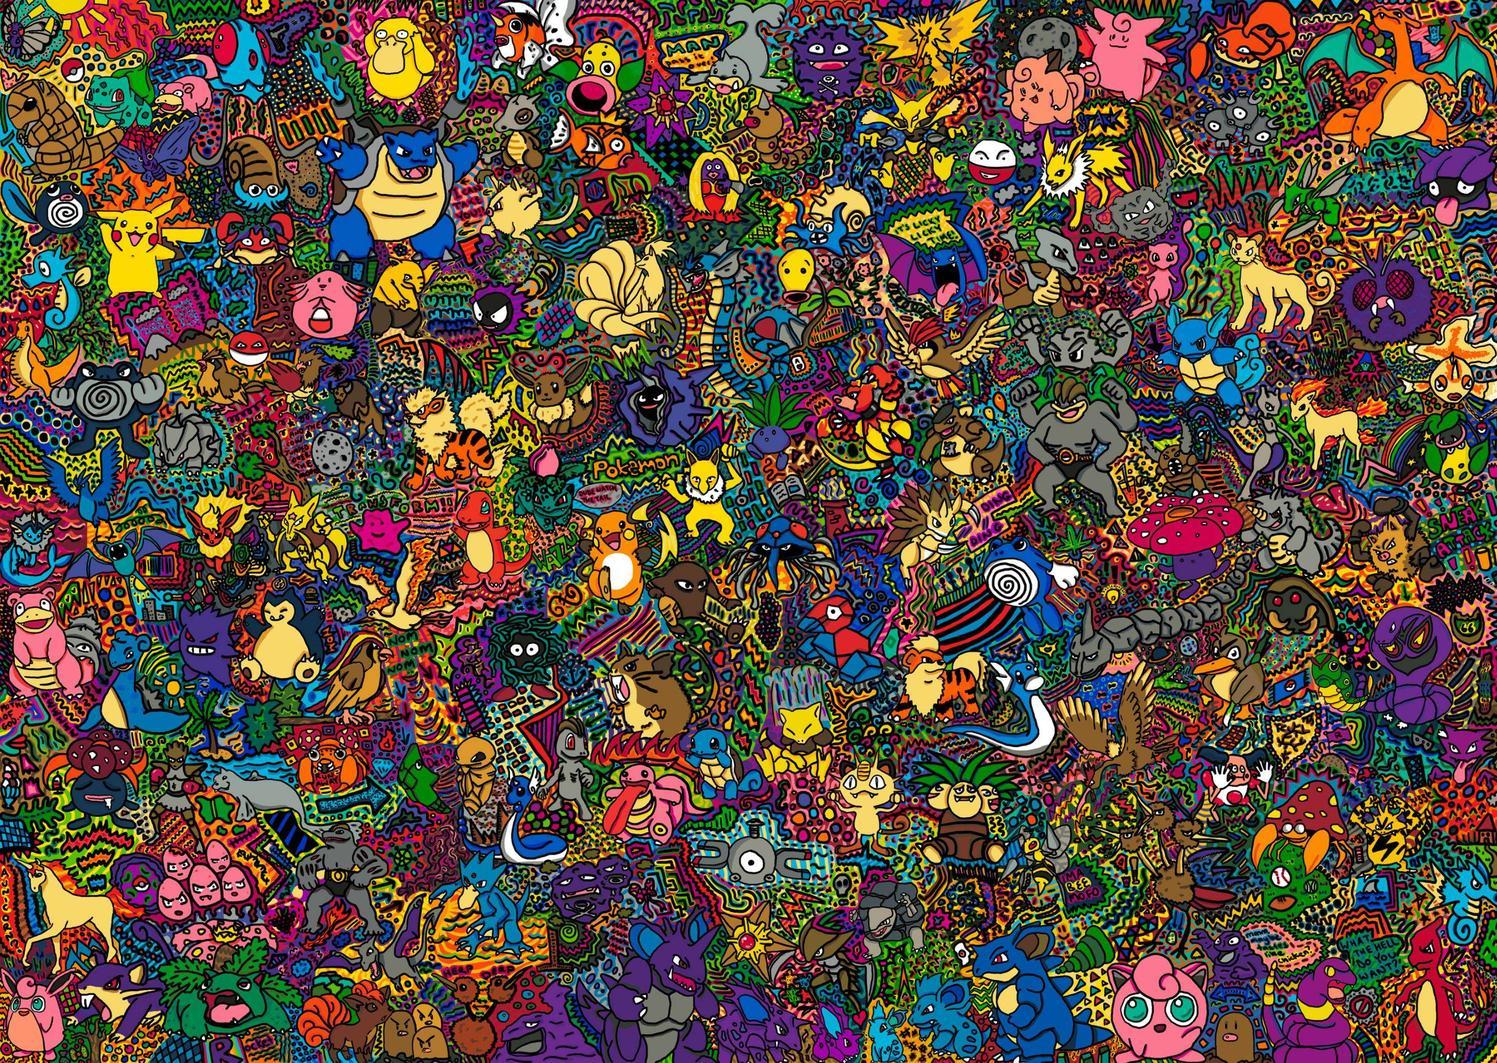 First 151 pokemon all in one wallpaper!